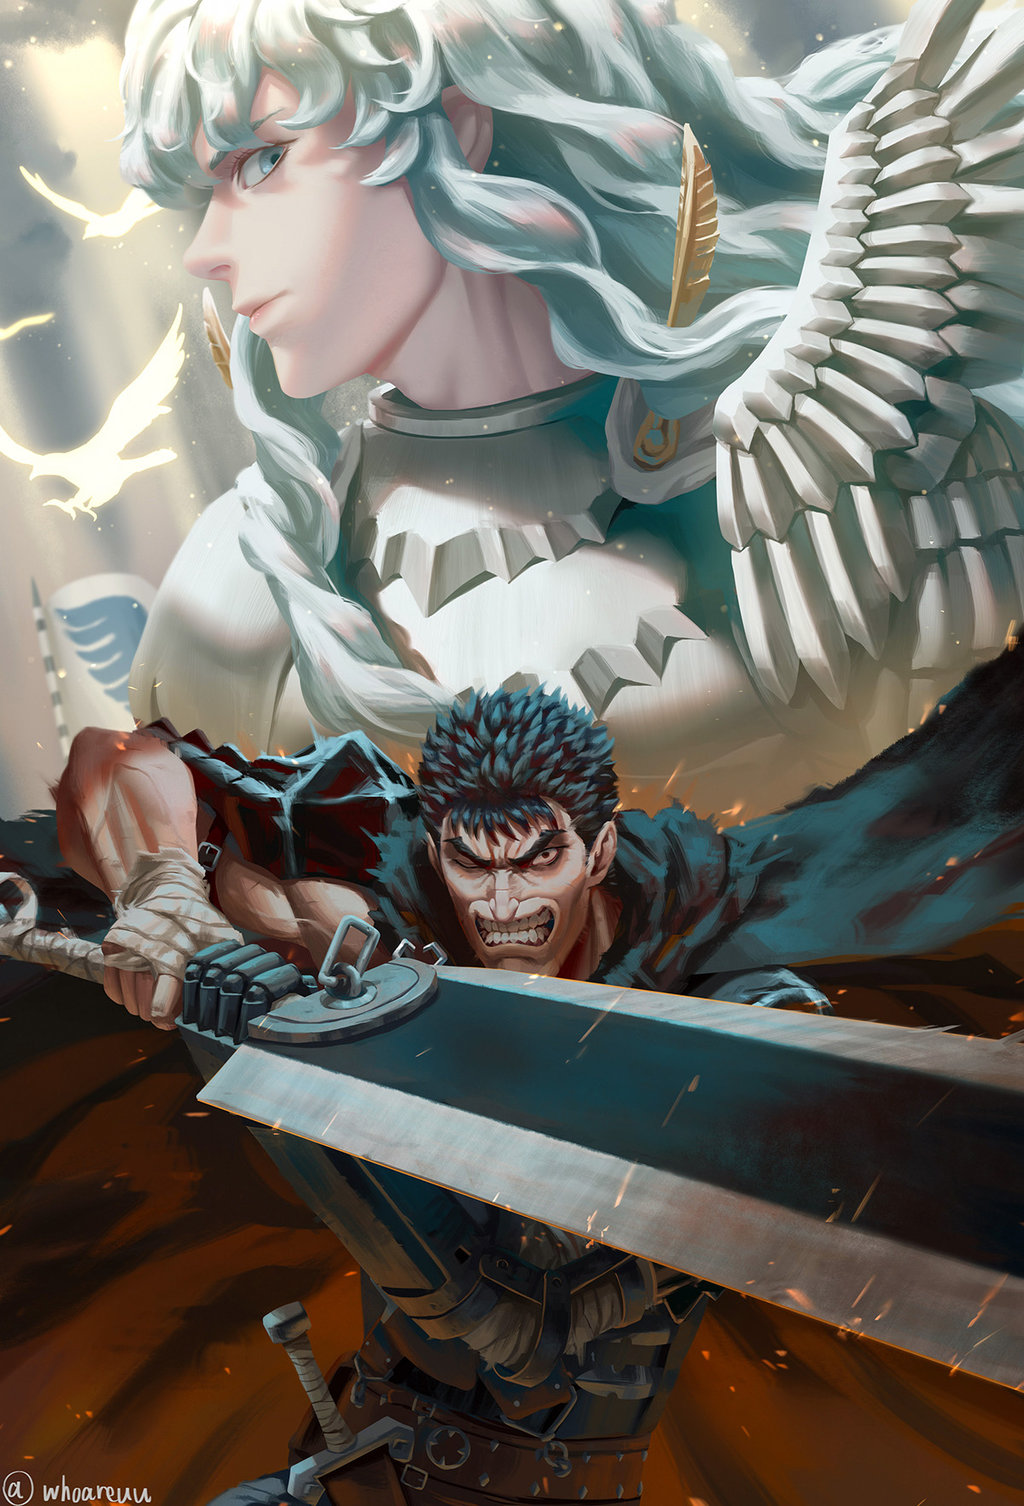 2boys androgynous armor bandage bandaged_hands bandages bangs berserk bird black_armor black_cape blue_eyes cape clenched_teeth commentary dragonslayer_(sword) english_commentary fighting_stance griffith guts highres holding holding_sword holding_weapon huge_weapon long_hair looking_at_viewer looking_to_the_side multiple_boys one-eyed prosthesis prosthetic_arm scar silver_hair spiky_hair sword teeth wavy_hair weapon white_hair whoareuu